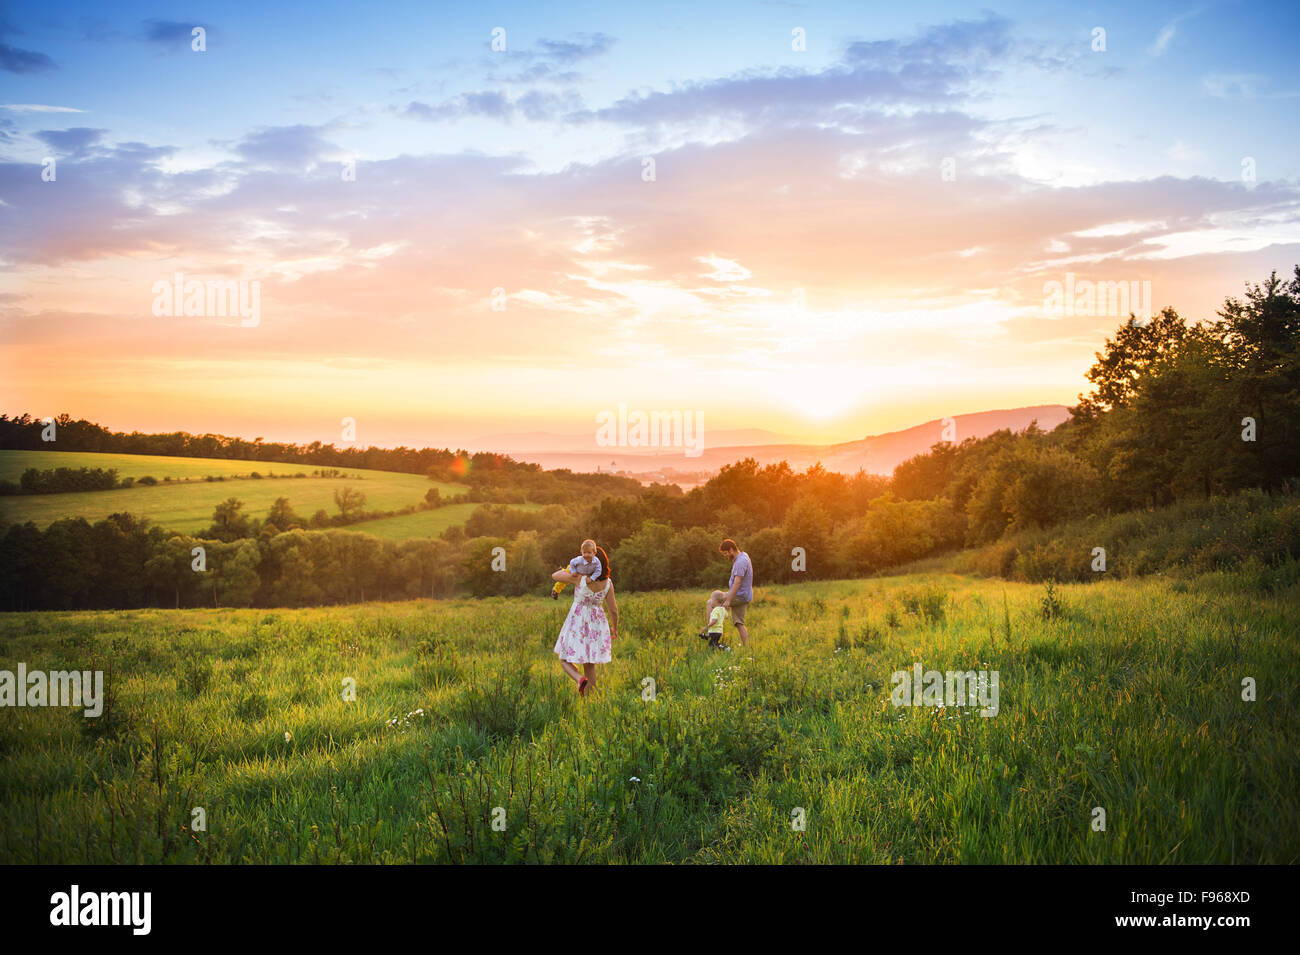 Happy young family have fun together in nature in sunset field Stock Photo